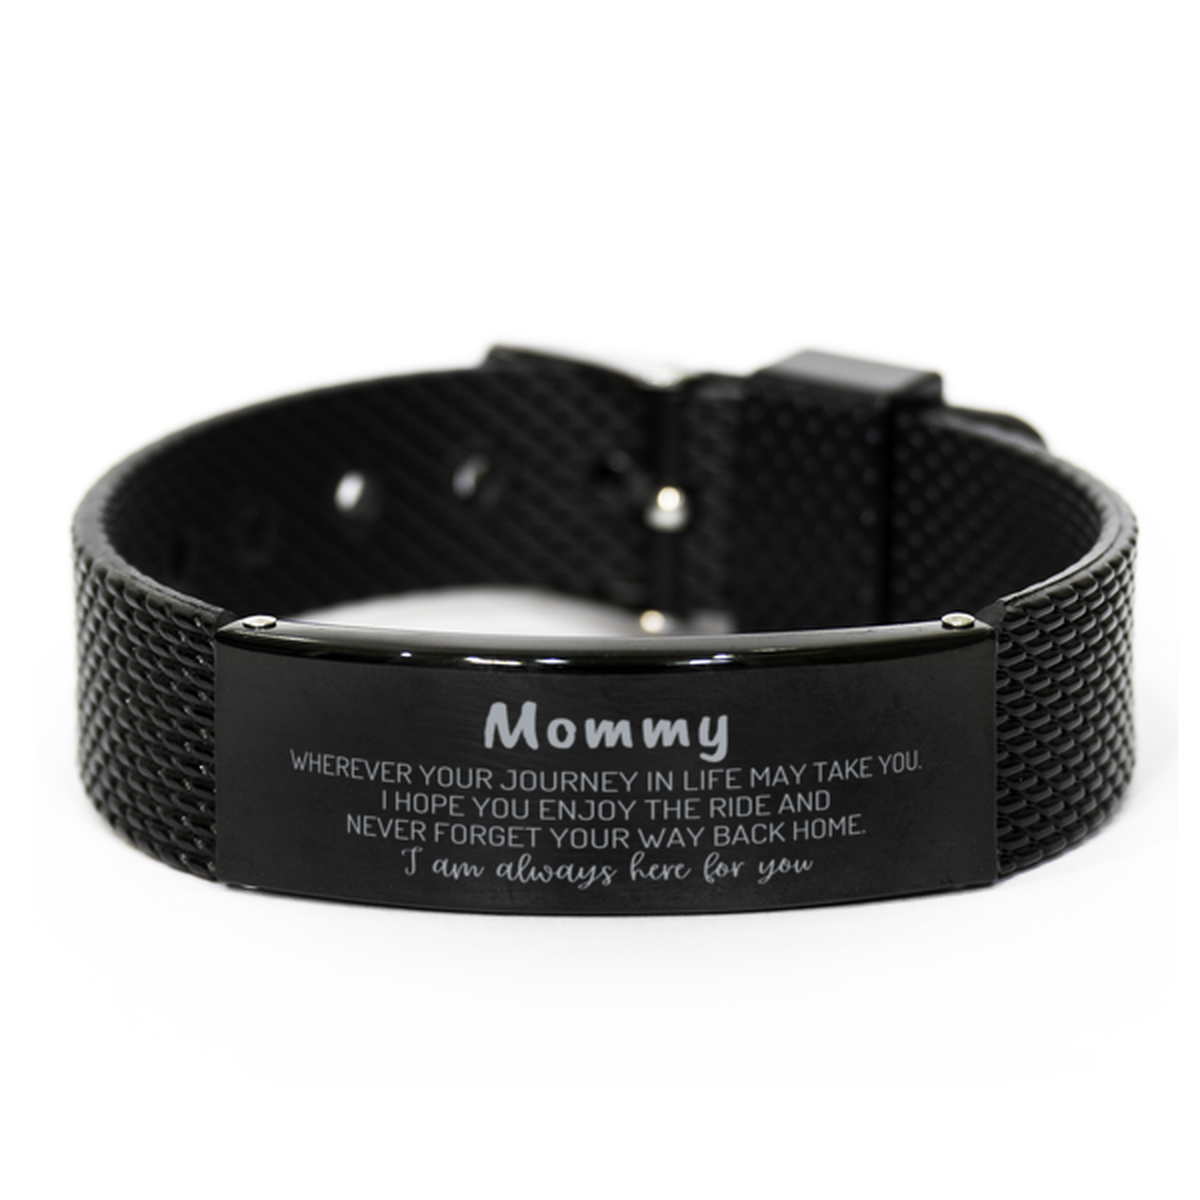 Mommy wherever your journey in life may take you, I am always here for you Mommy Black Shark Mesh Bracelet, Awesome Christmas Gifts For Mommy, Mommy Birthday Gifts for Men Women Family Loved One